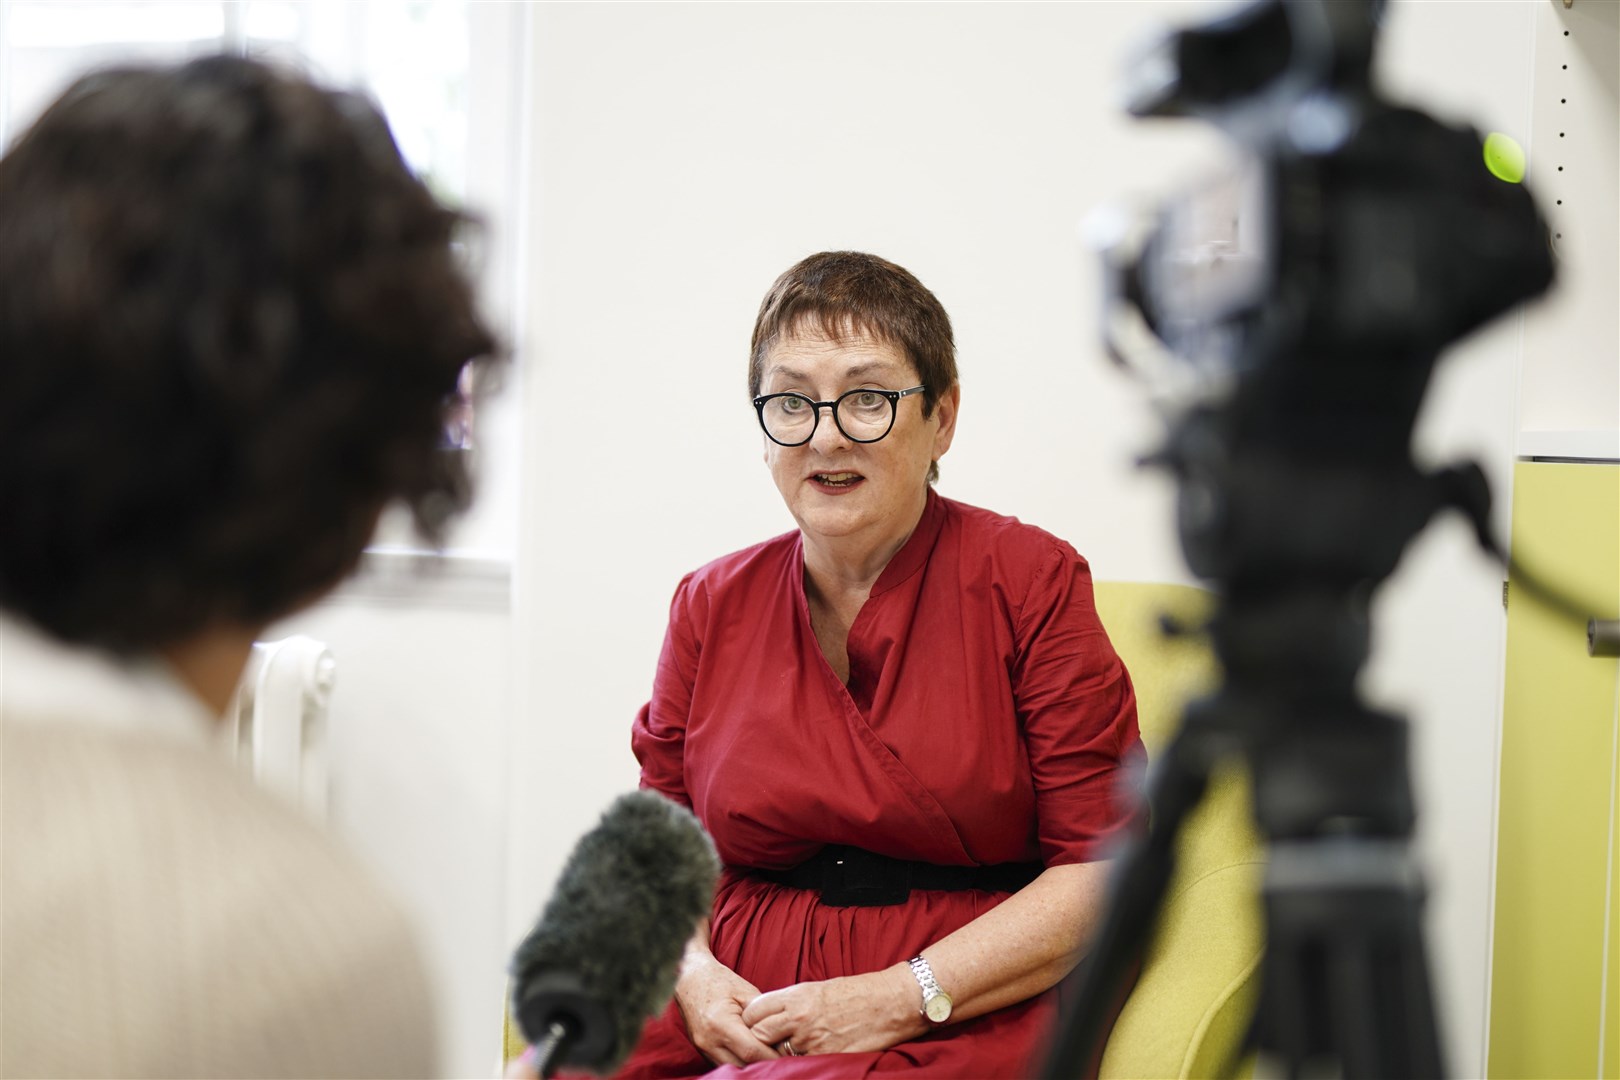 Dr Mary Bousted, joint general secretary of the National Education Union (NEU), during an interview (Jordan Pettitt/PA)